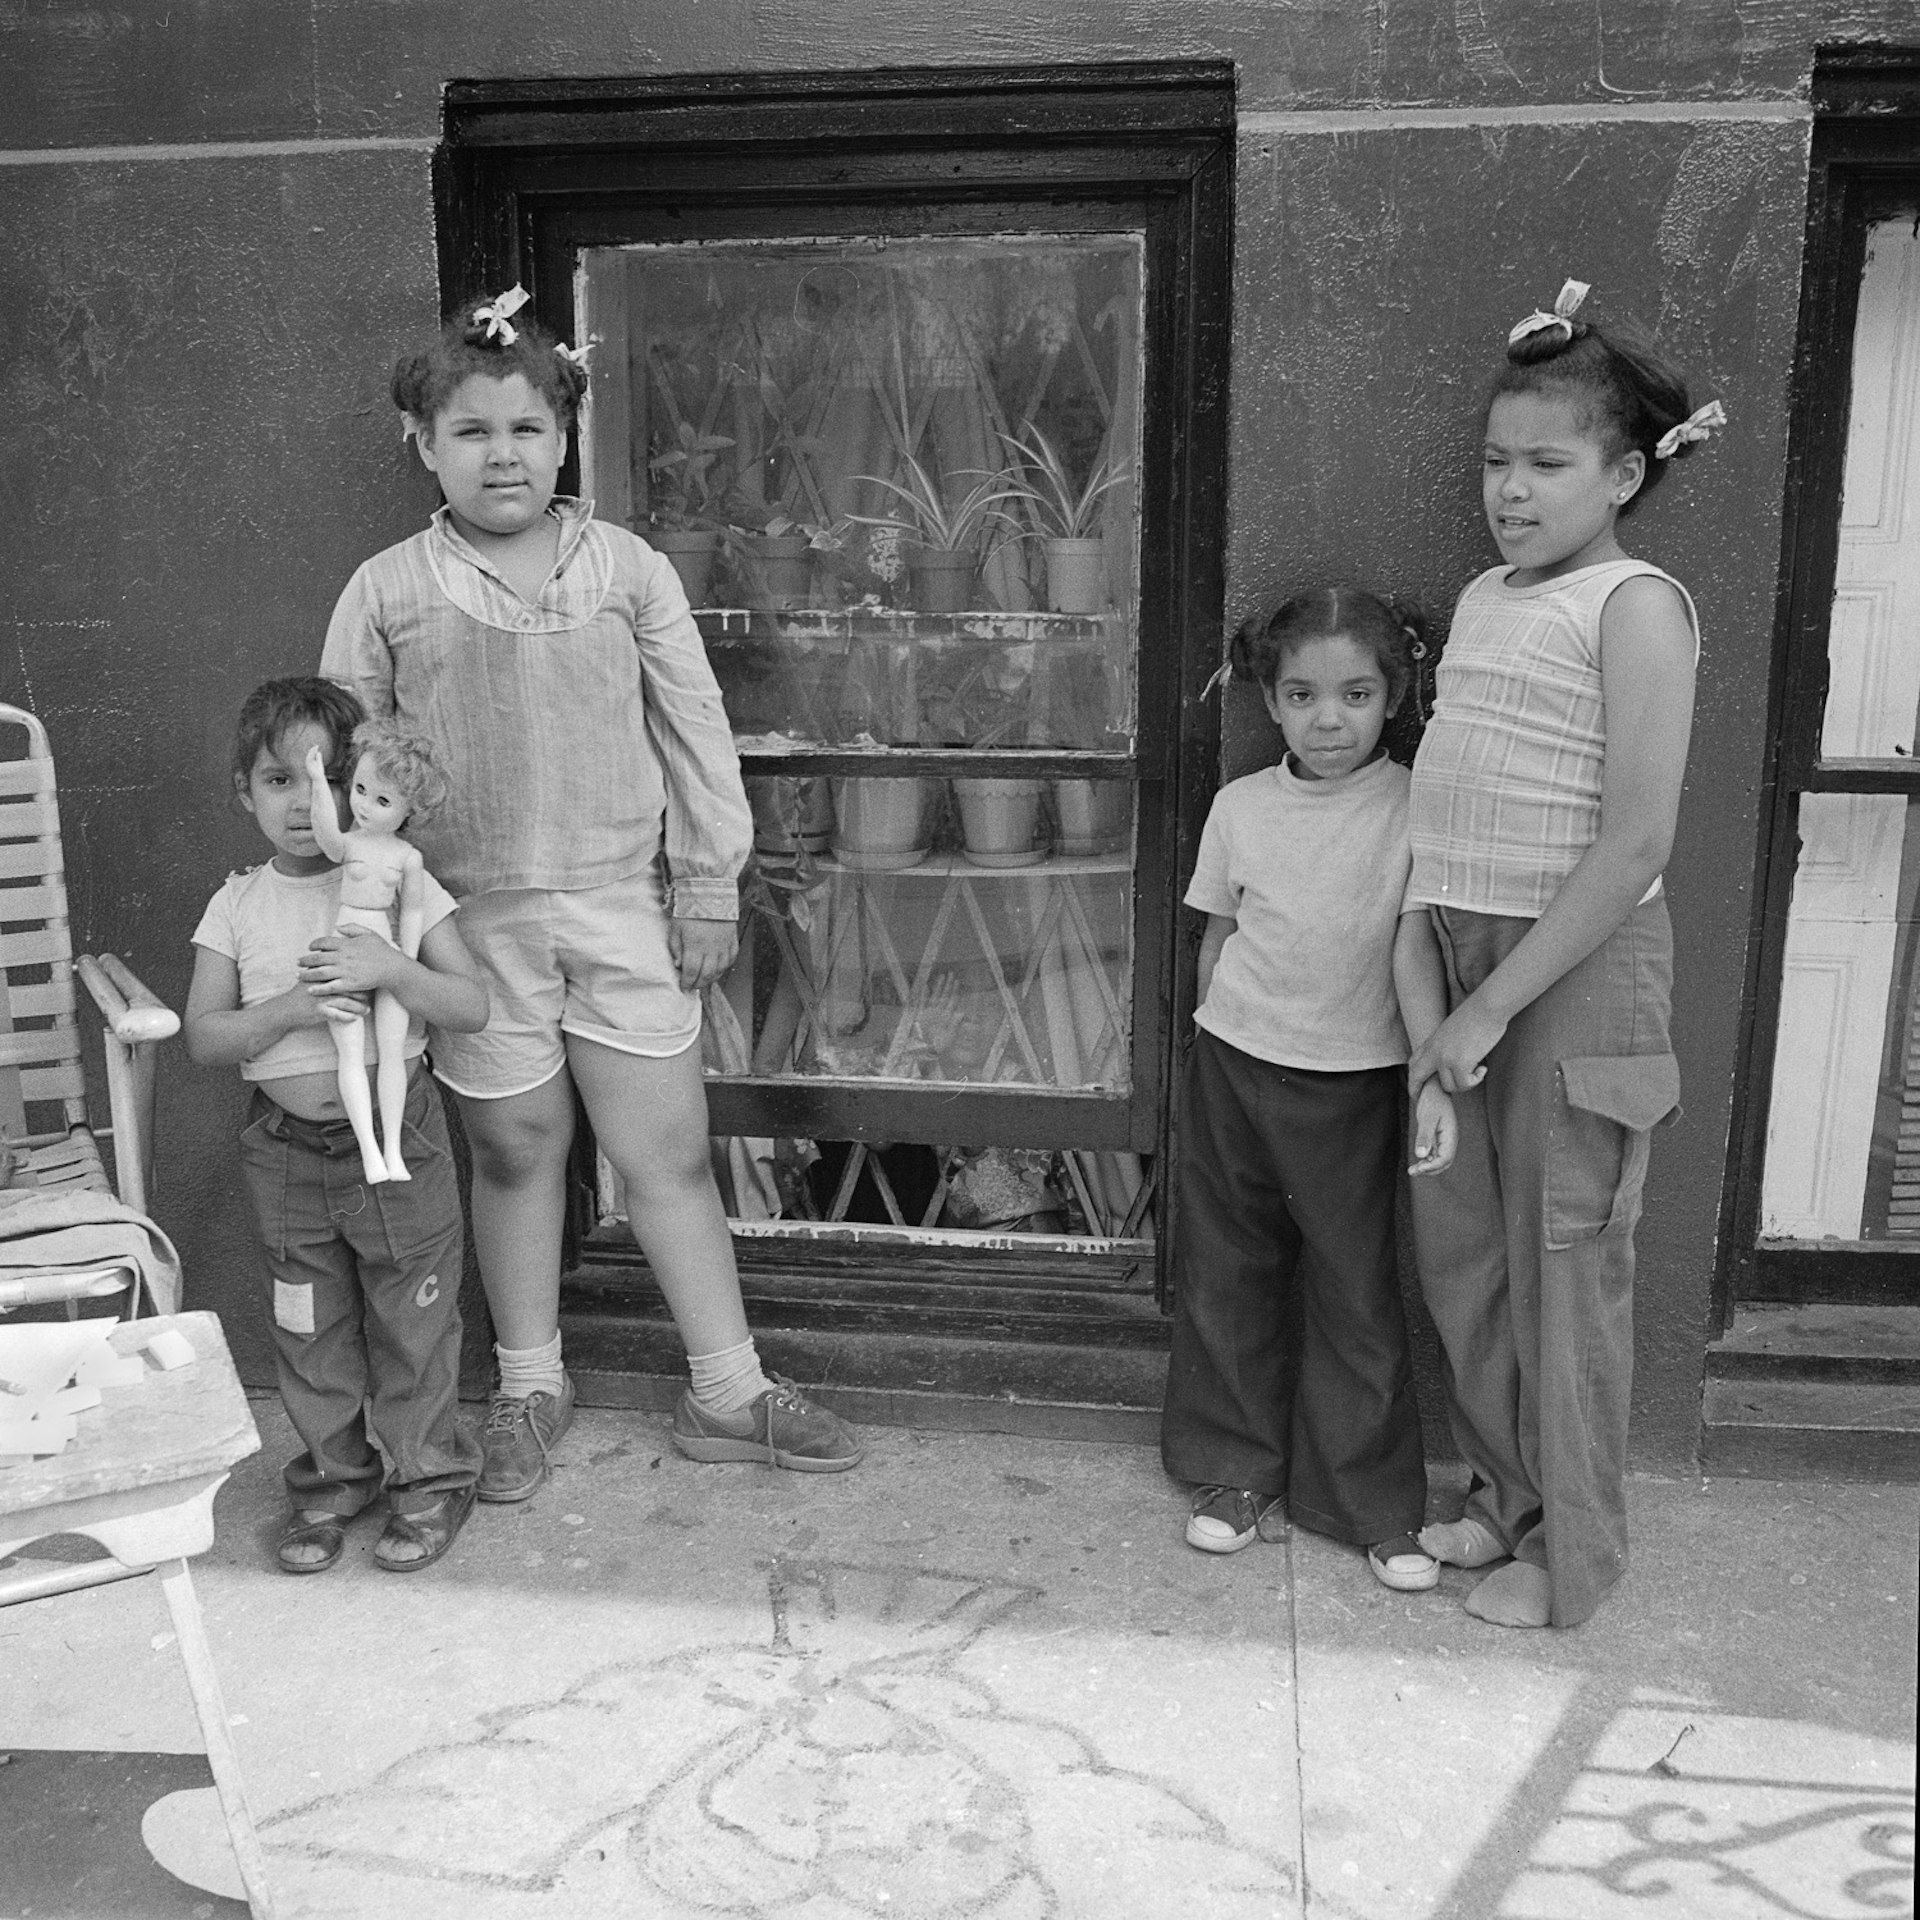 Four kids and a doll in front of a window NY, NY June 1978